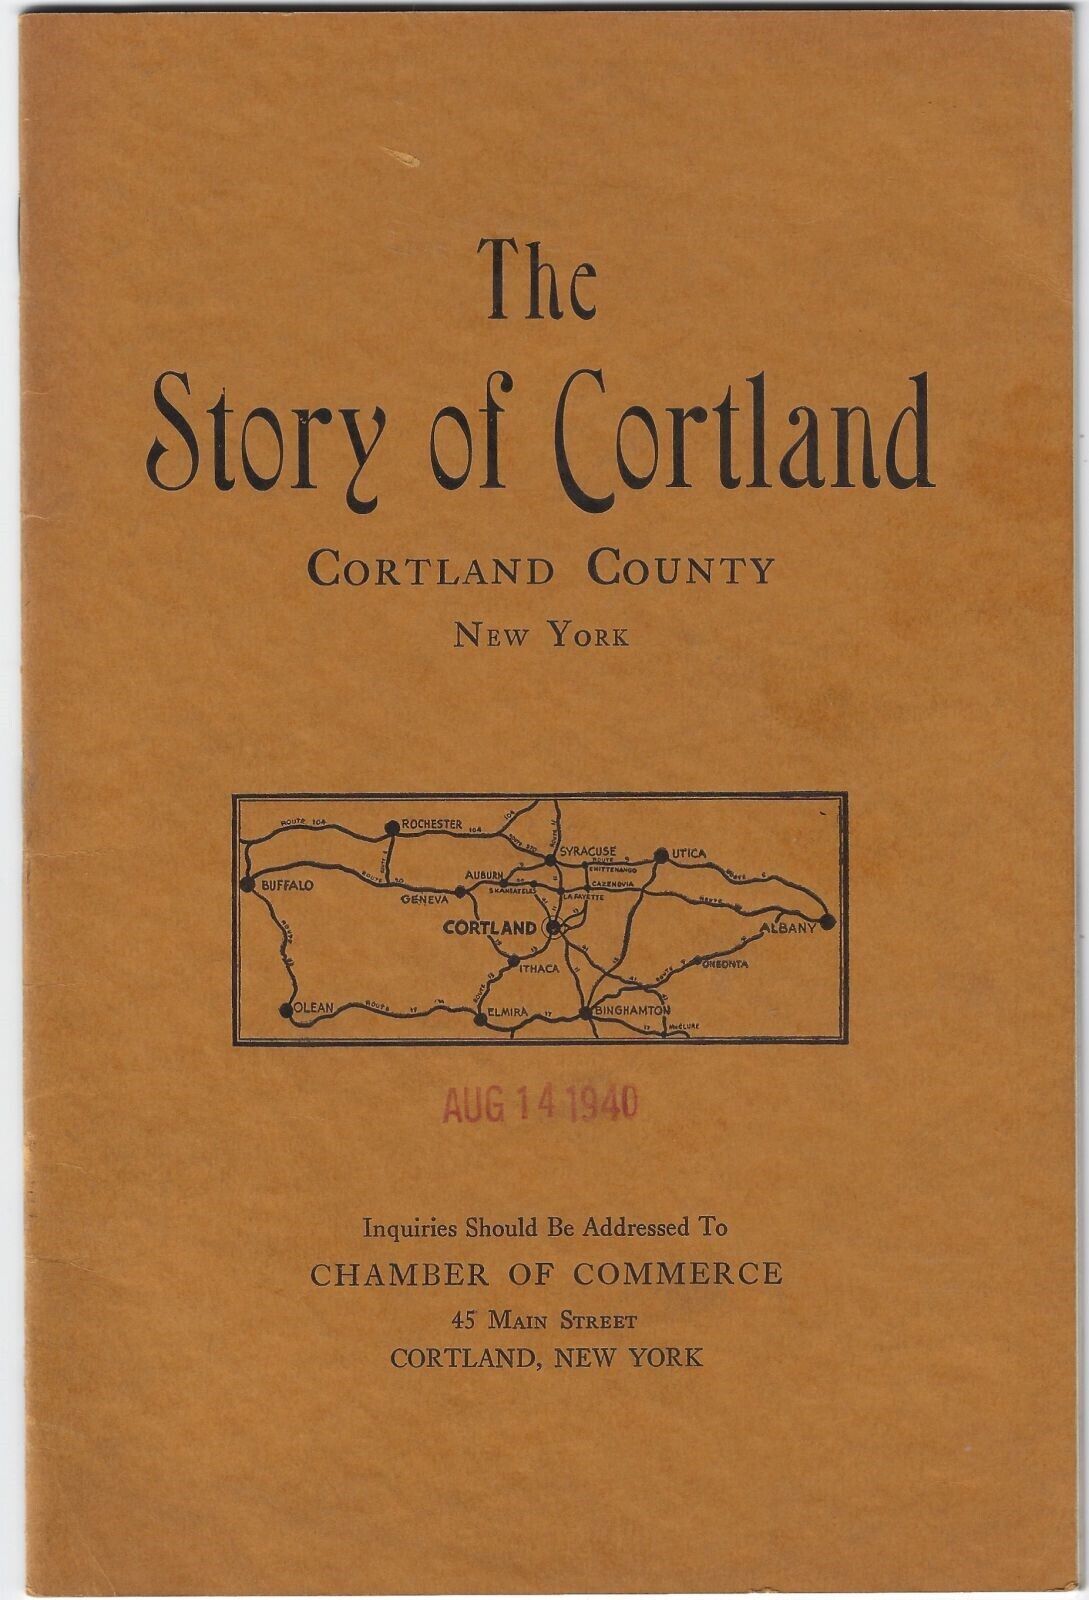 The Story of Cortland County NY 1940 Vintage Business Industry Agriculture